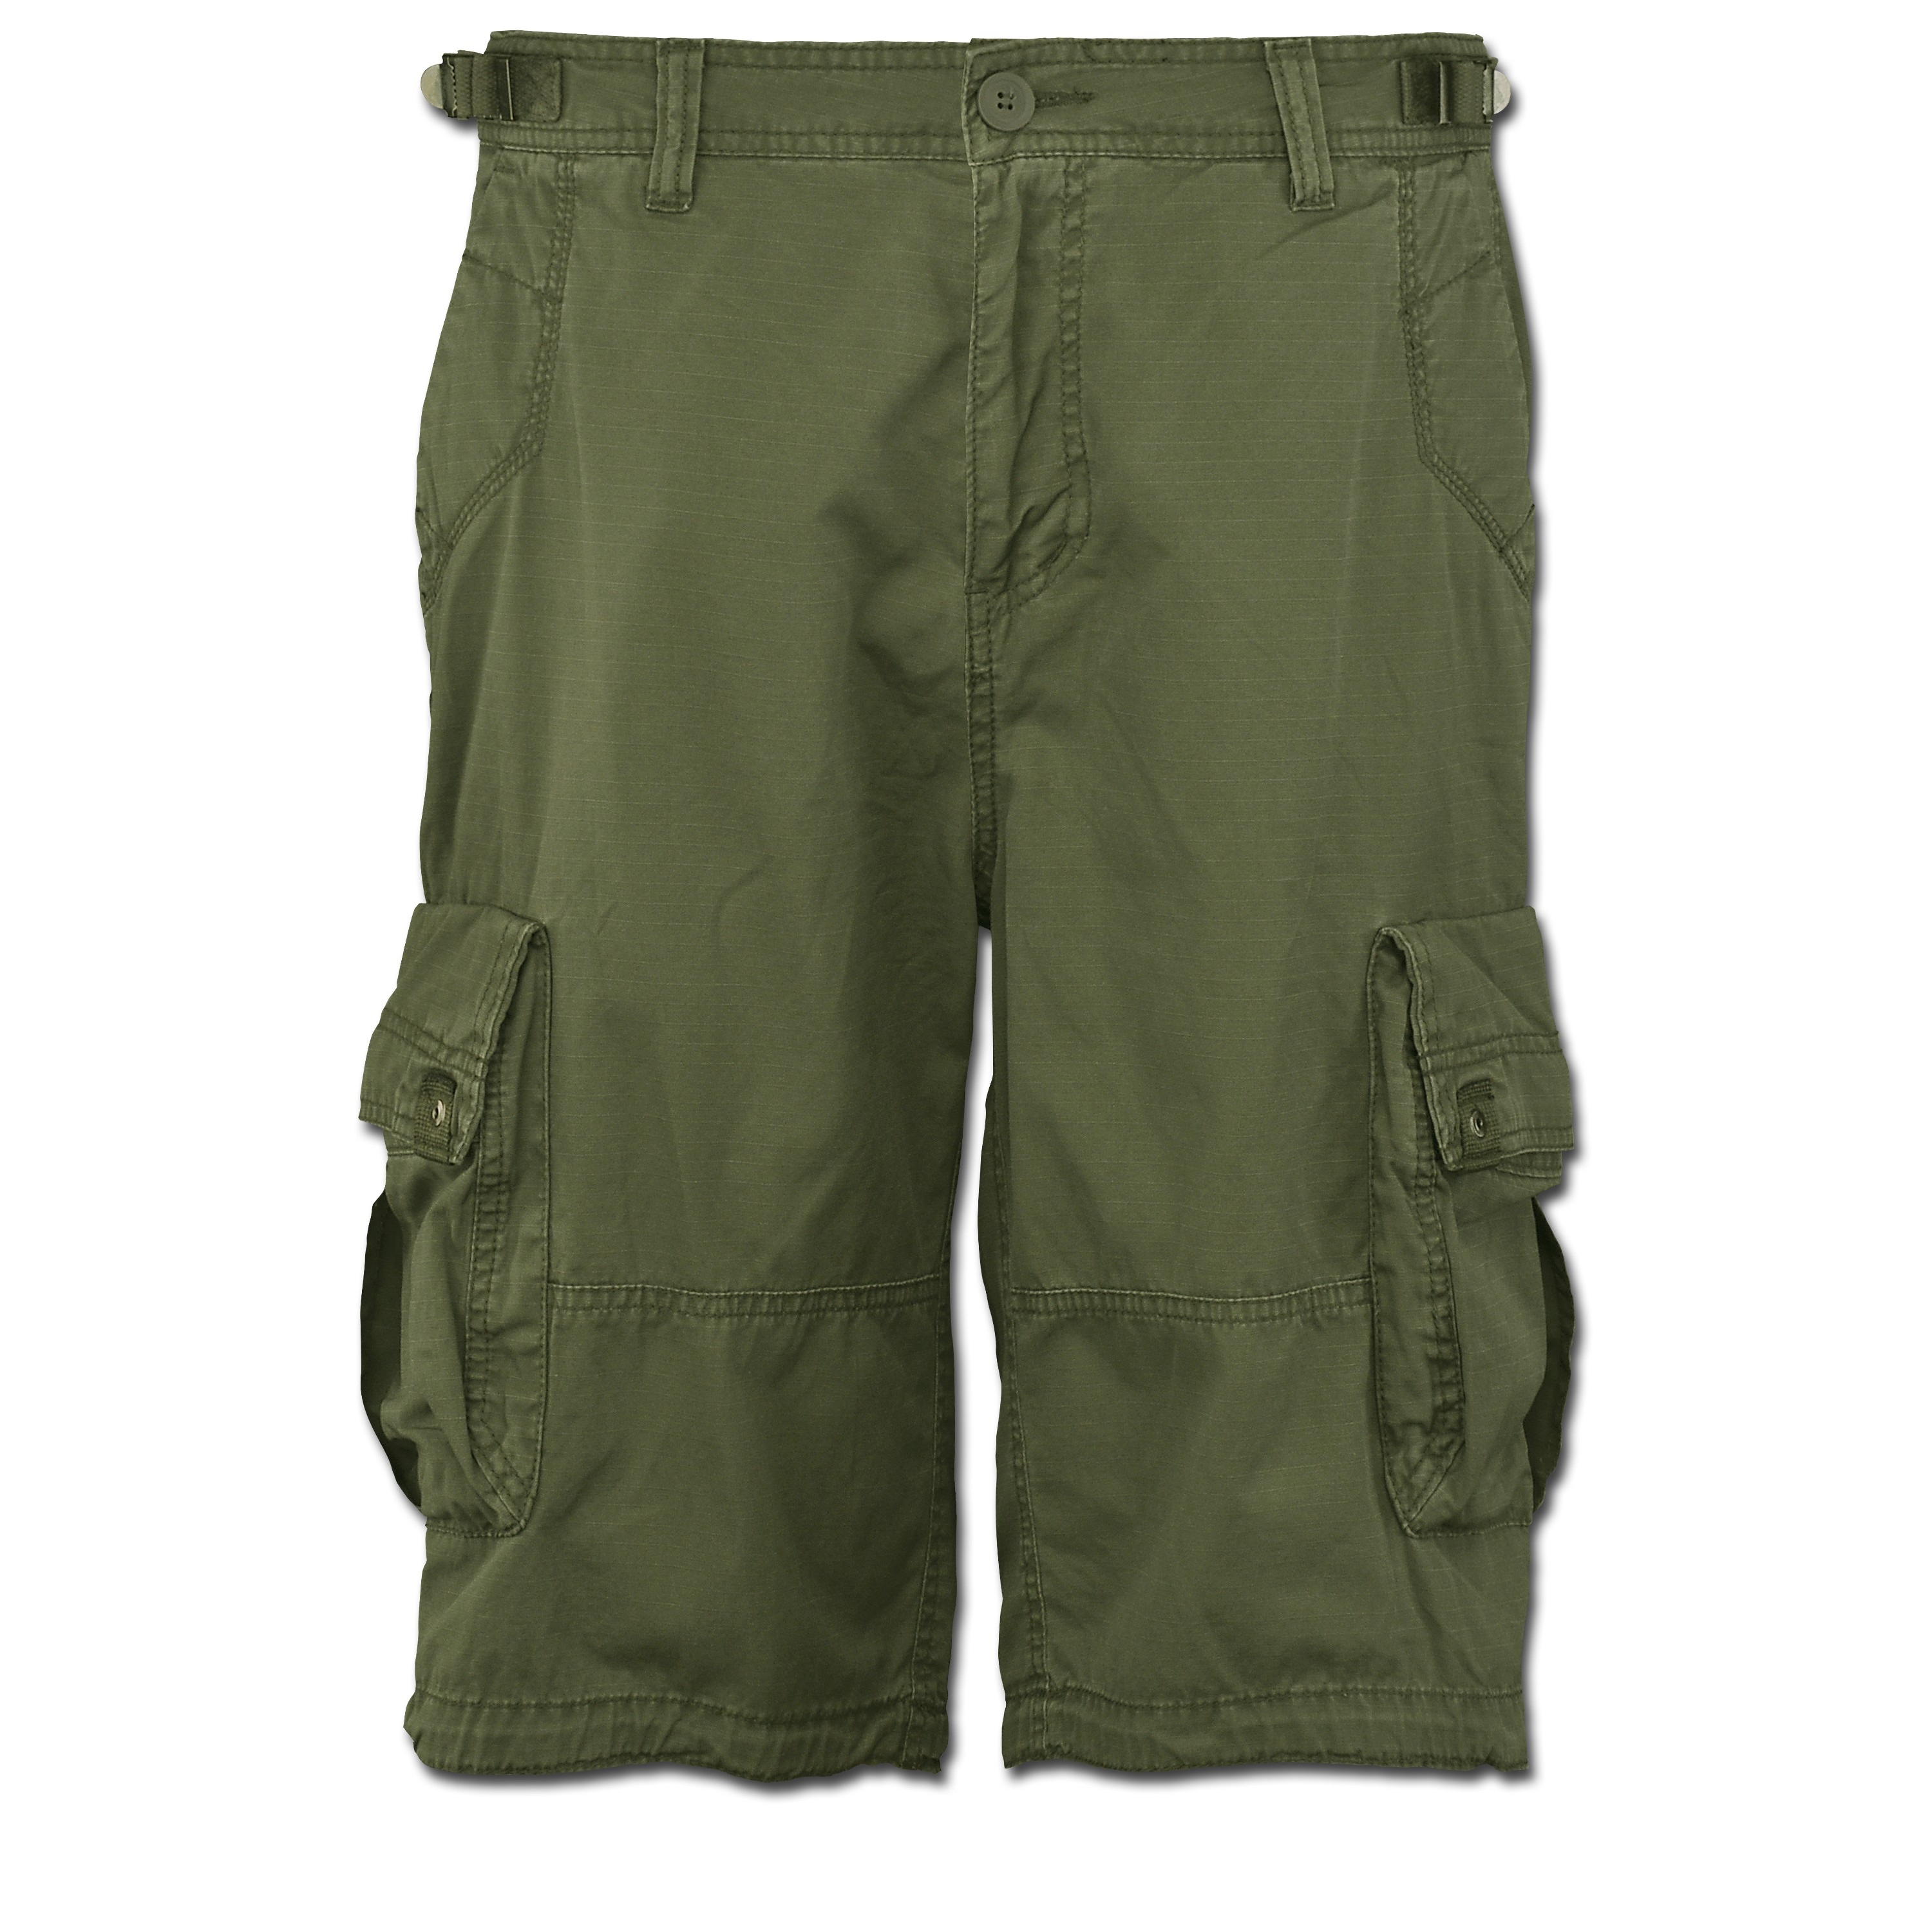 Purchase the Vintage Industries Shorts Terrance olive by ASMC